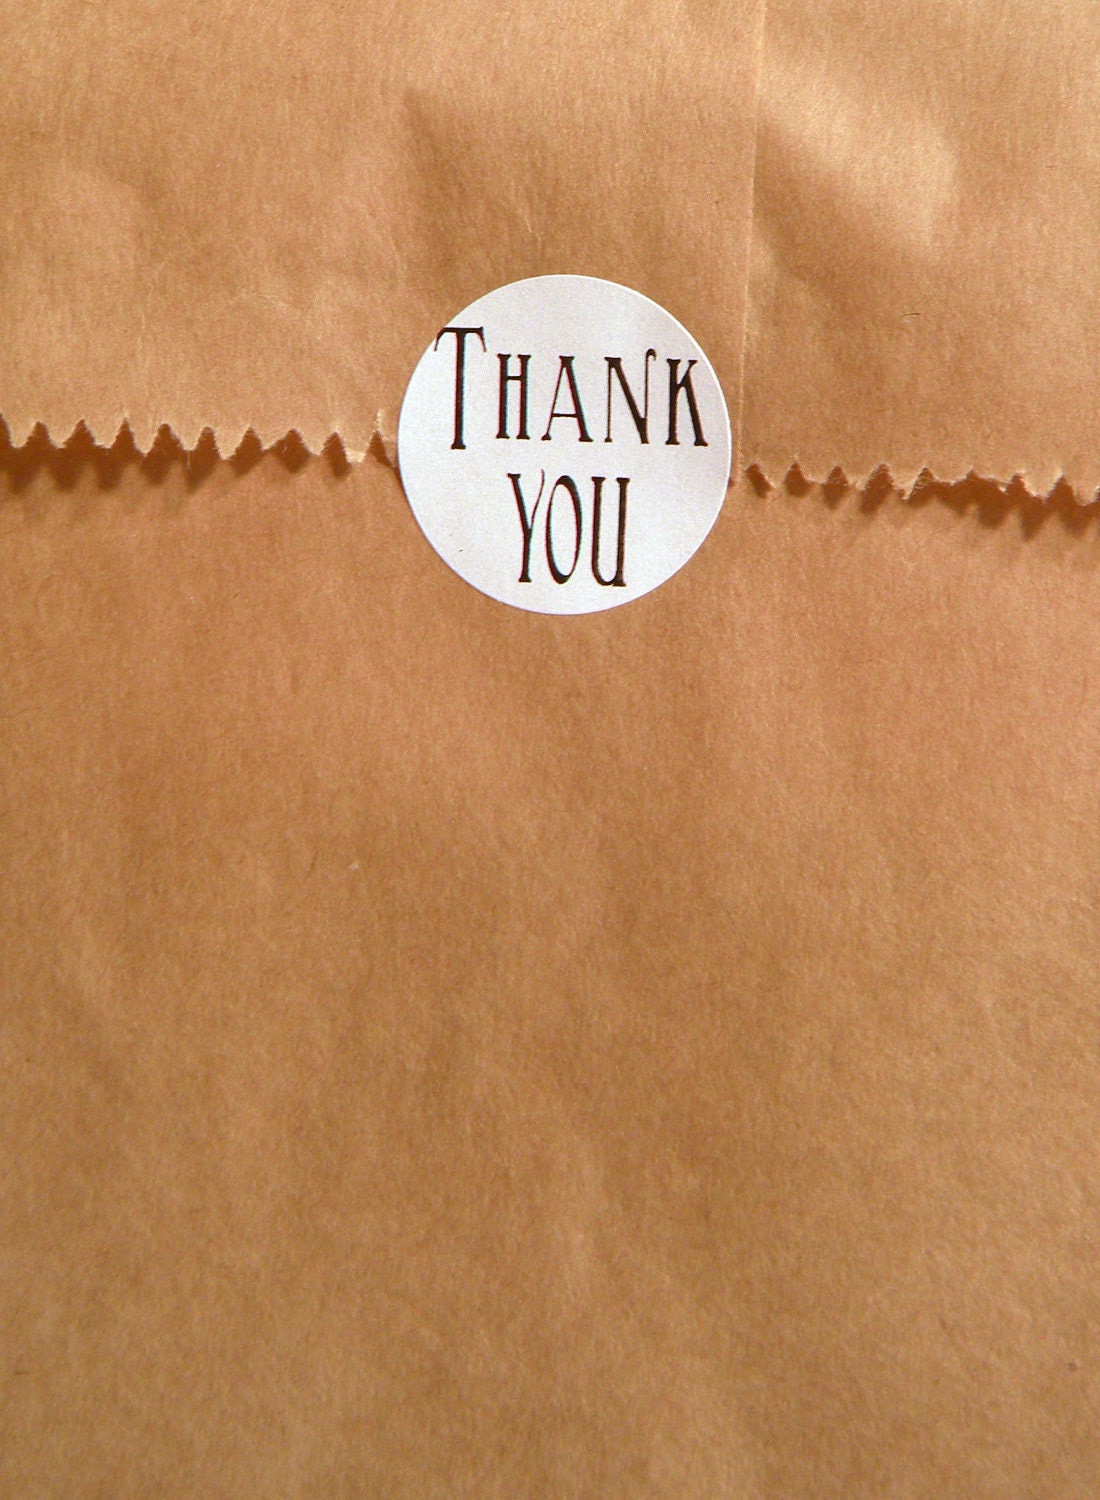 FREE SHIPPING - Thank You Sticker 1inch circle